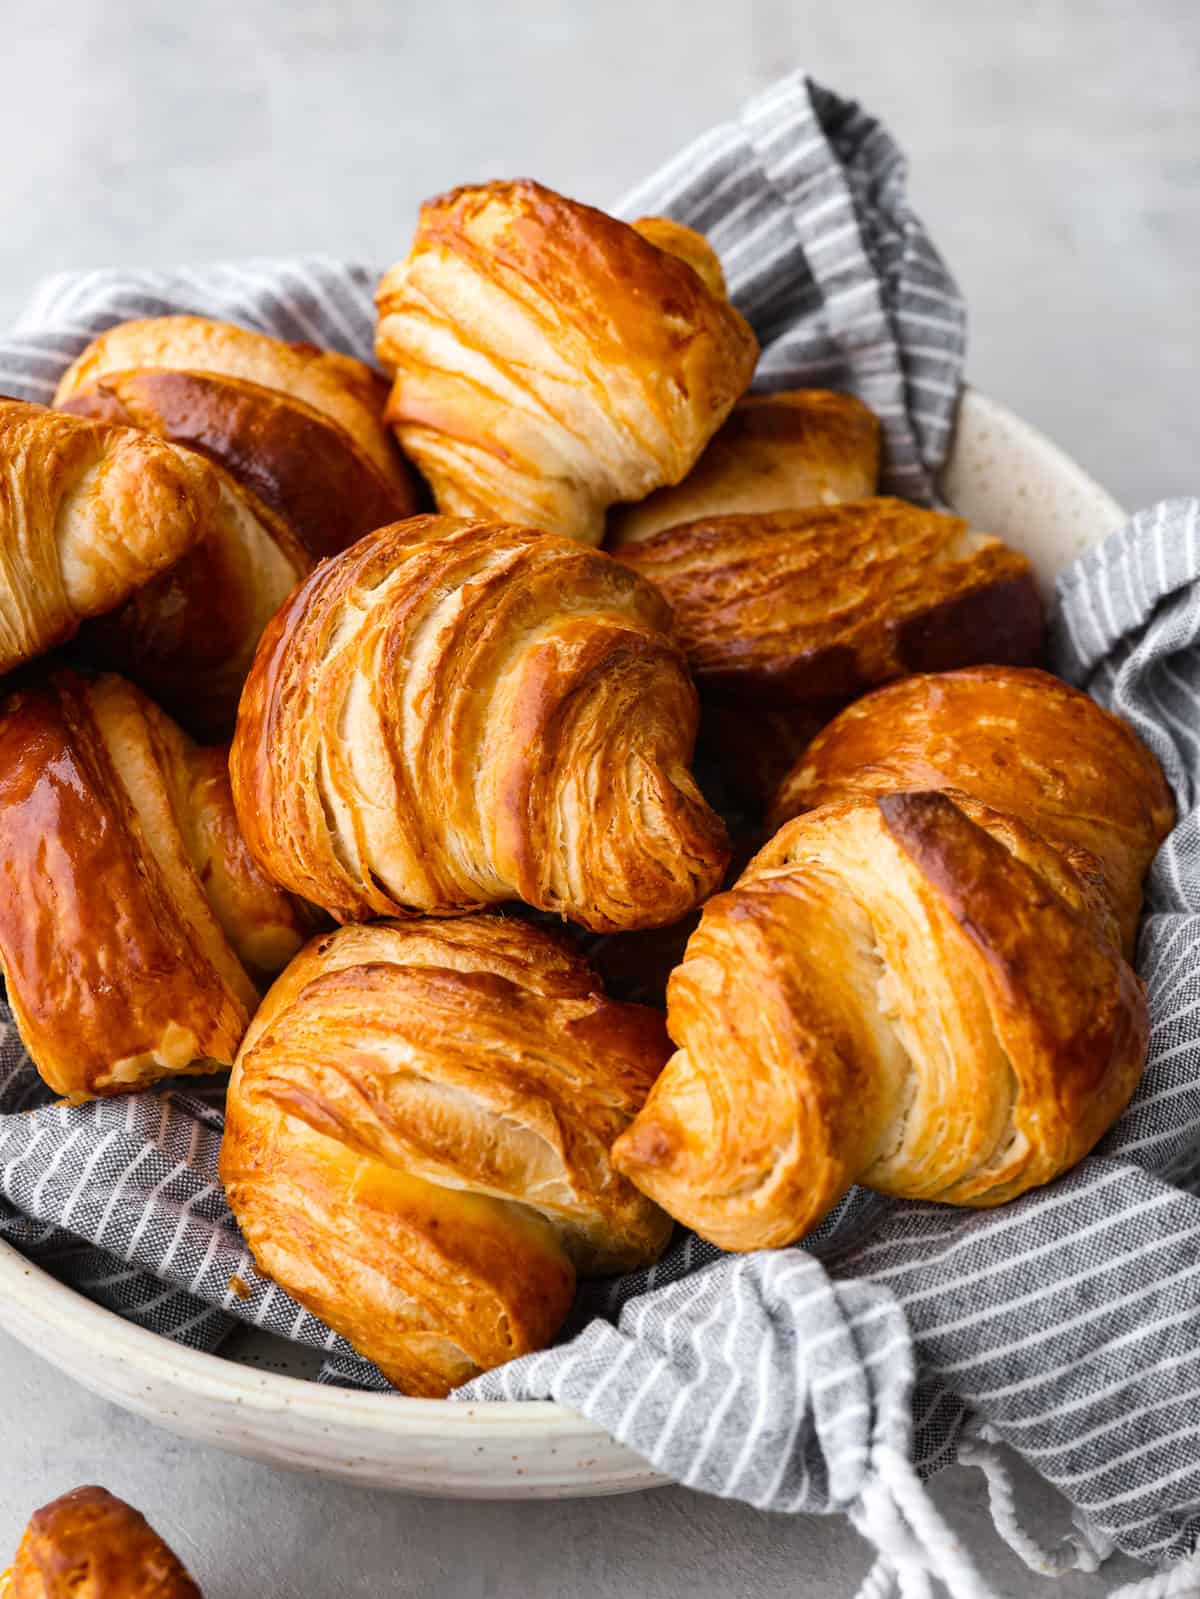 How to Make Homemade Croissants